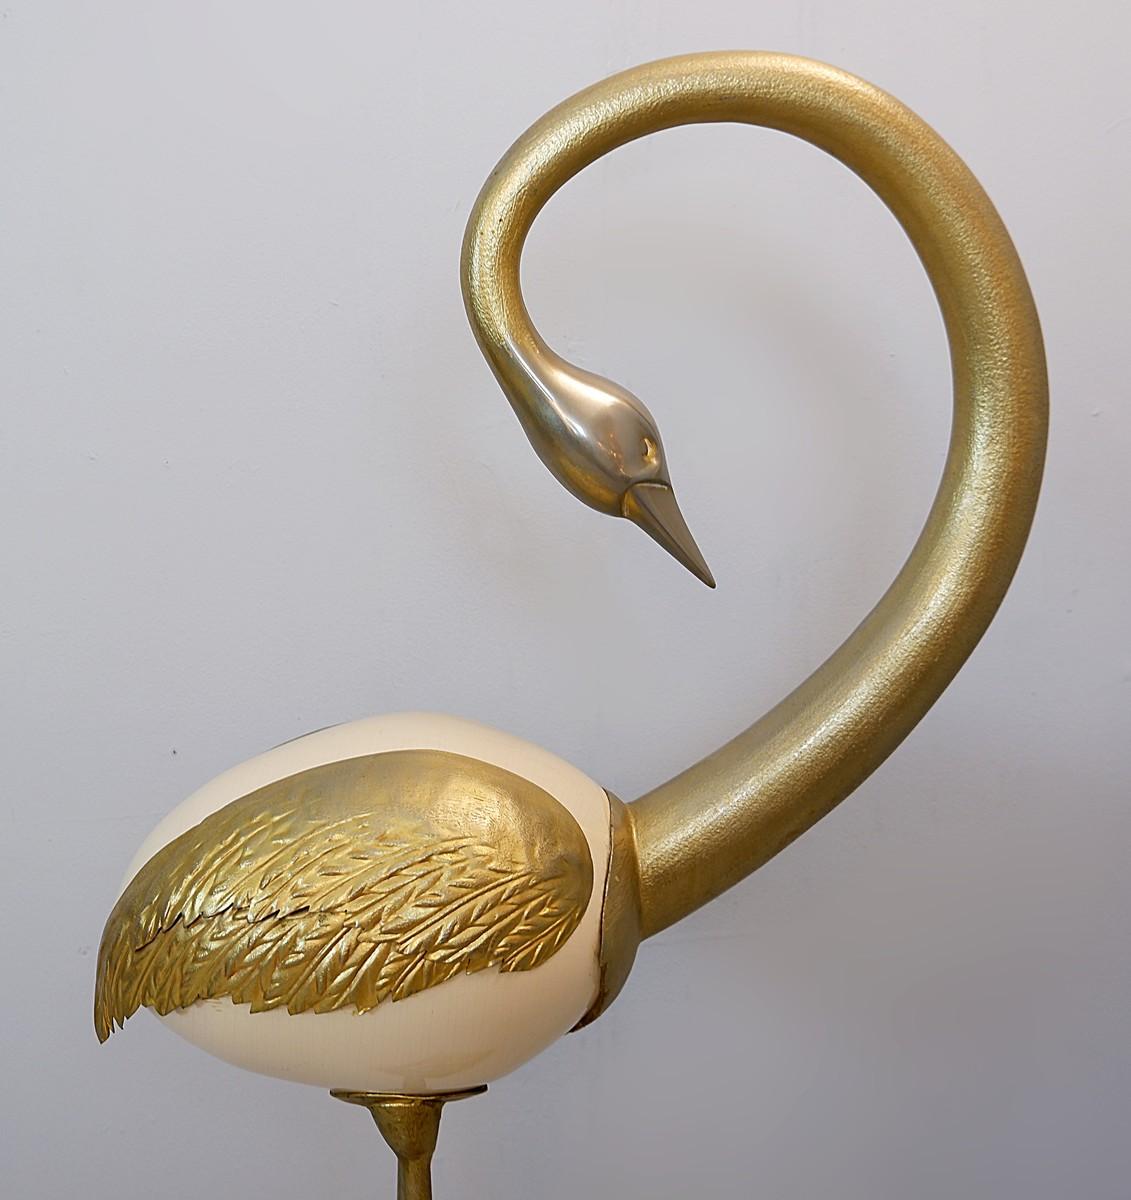 Ostrich sculpture made from an ostrich's egg with gilded metal.